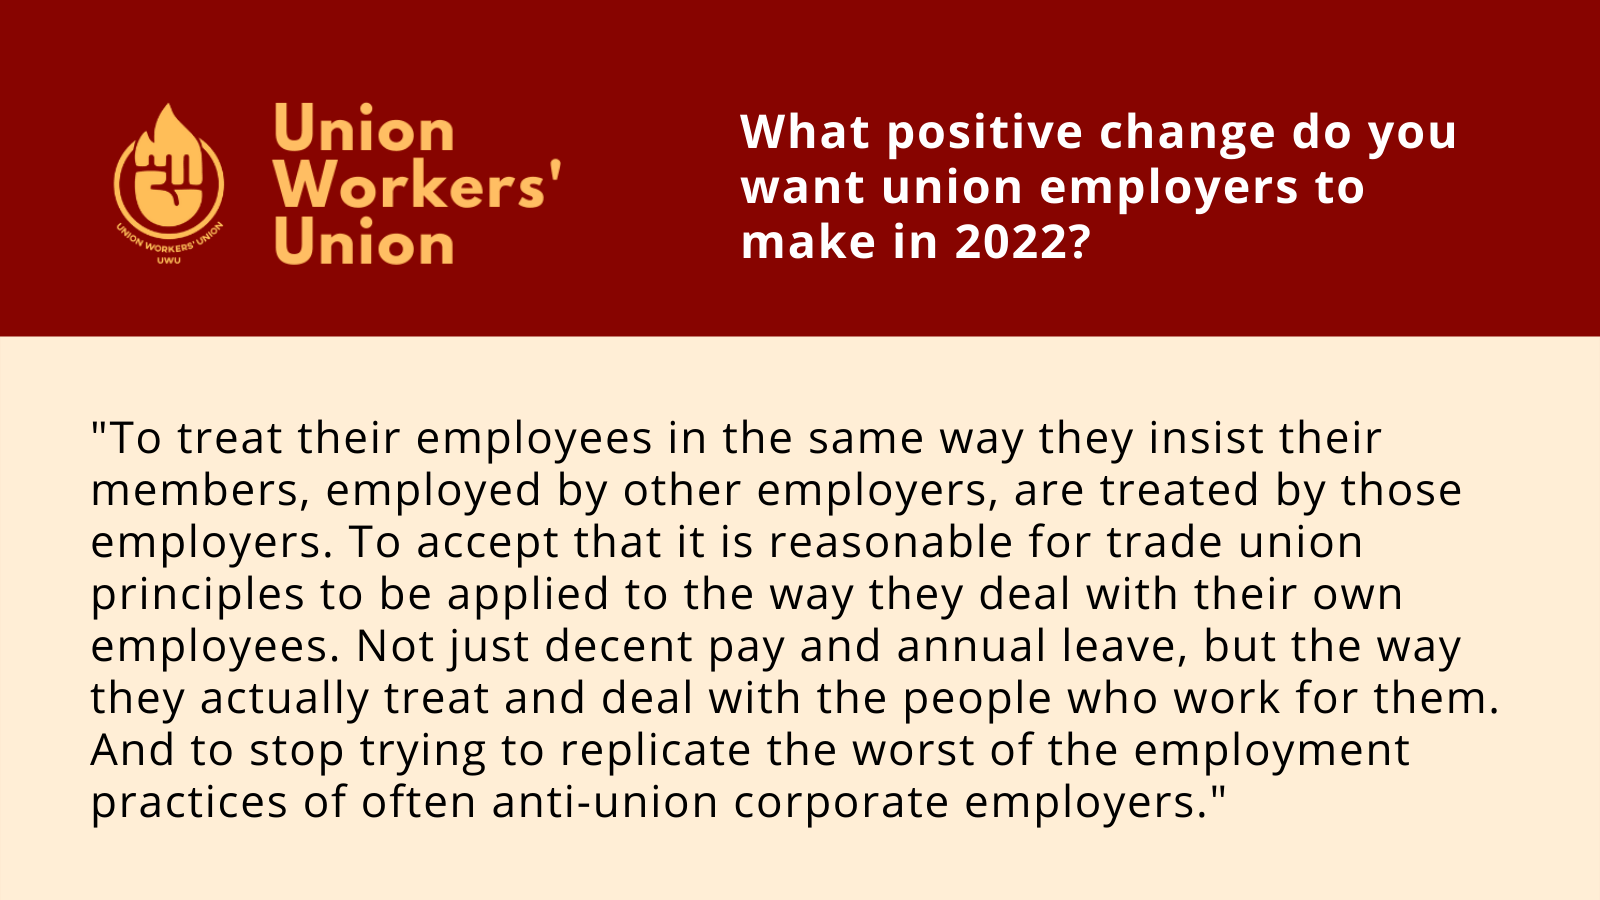 UWU logo next to question, what positive change do you want union employers to make in 2022? Member response: To treat their employees in the same way they insist their members, employed by other employers, are treated by those employers. To accept that it is reasonable for trade union principles to be applied to the way they deal with their own employees. Not just decent pay and number of day's annual leave, but the way they actually treat and deal with the people who work for them. And to stop trying to replicate the worst of the employment practices of often anti-union corporate employers.